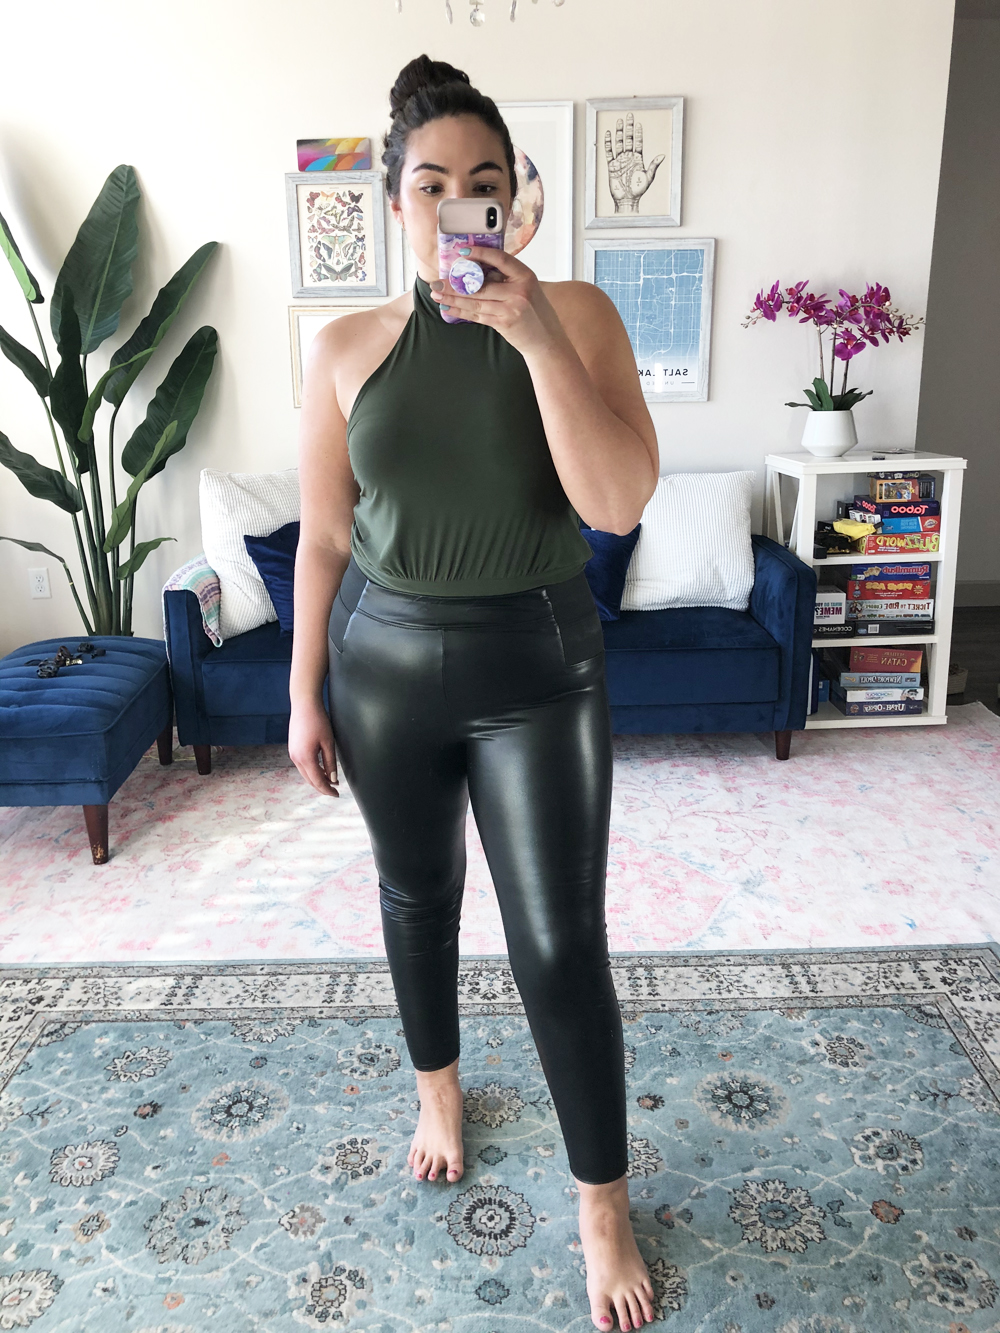 SPANX - Three words: Best booty ever 🍑 Our Faux Leather Leggings